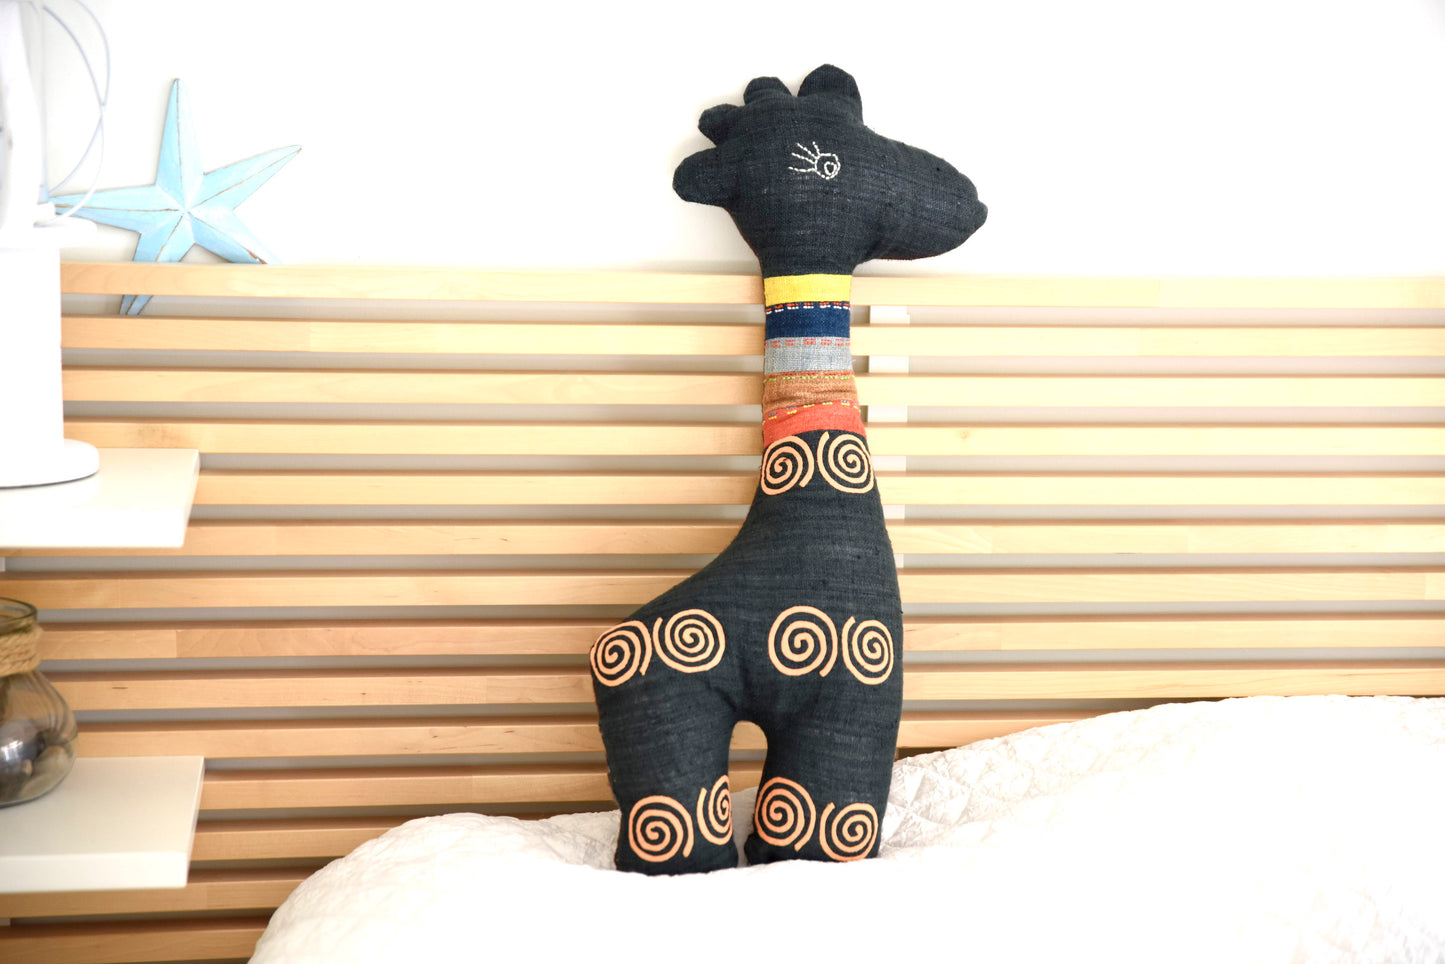 Unique blue cuddly deer stuffed animal, dark indigo blue, natural colored, hand-made from H'mong tribal fabrics